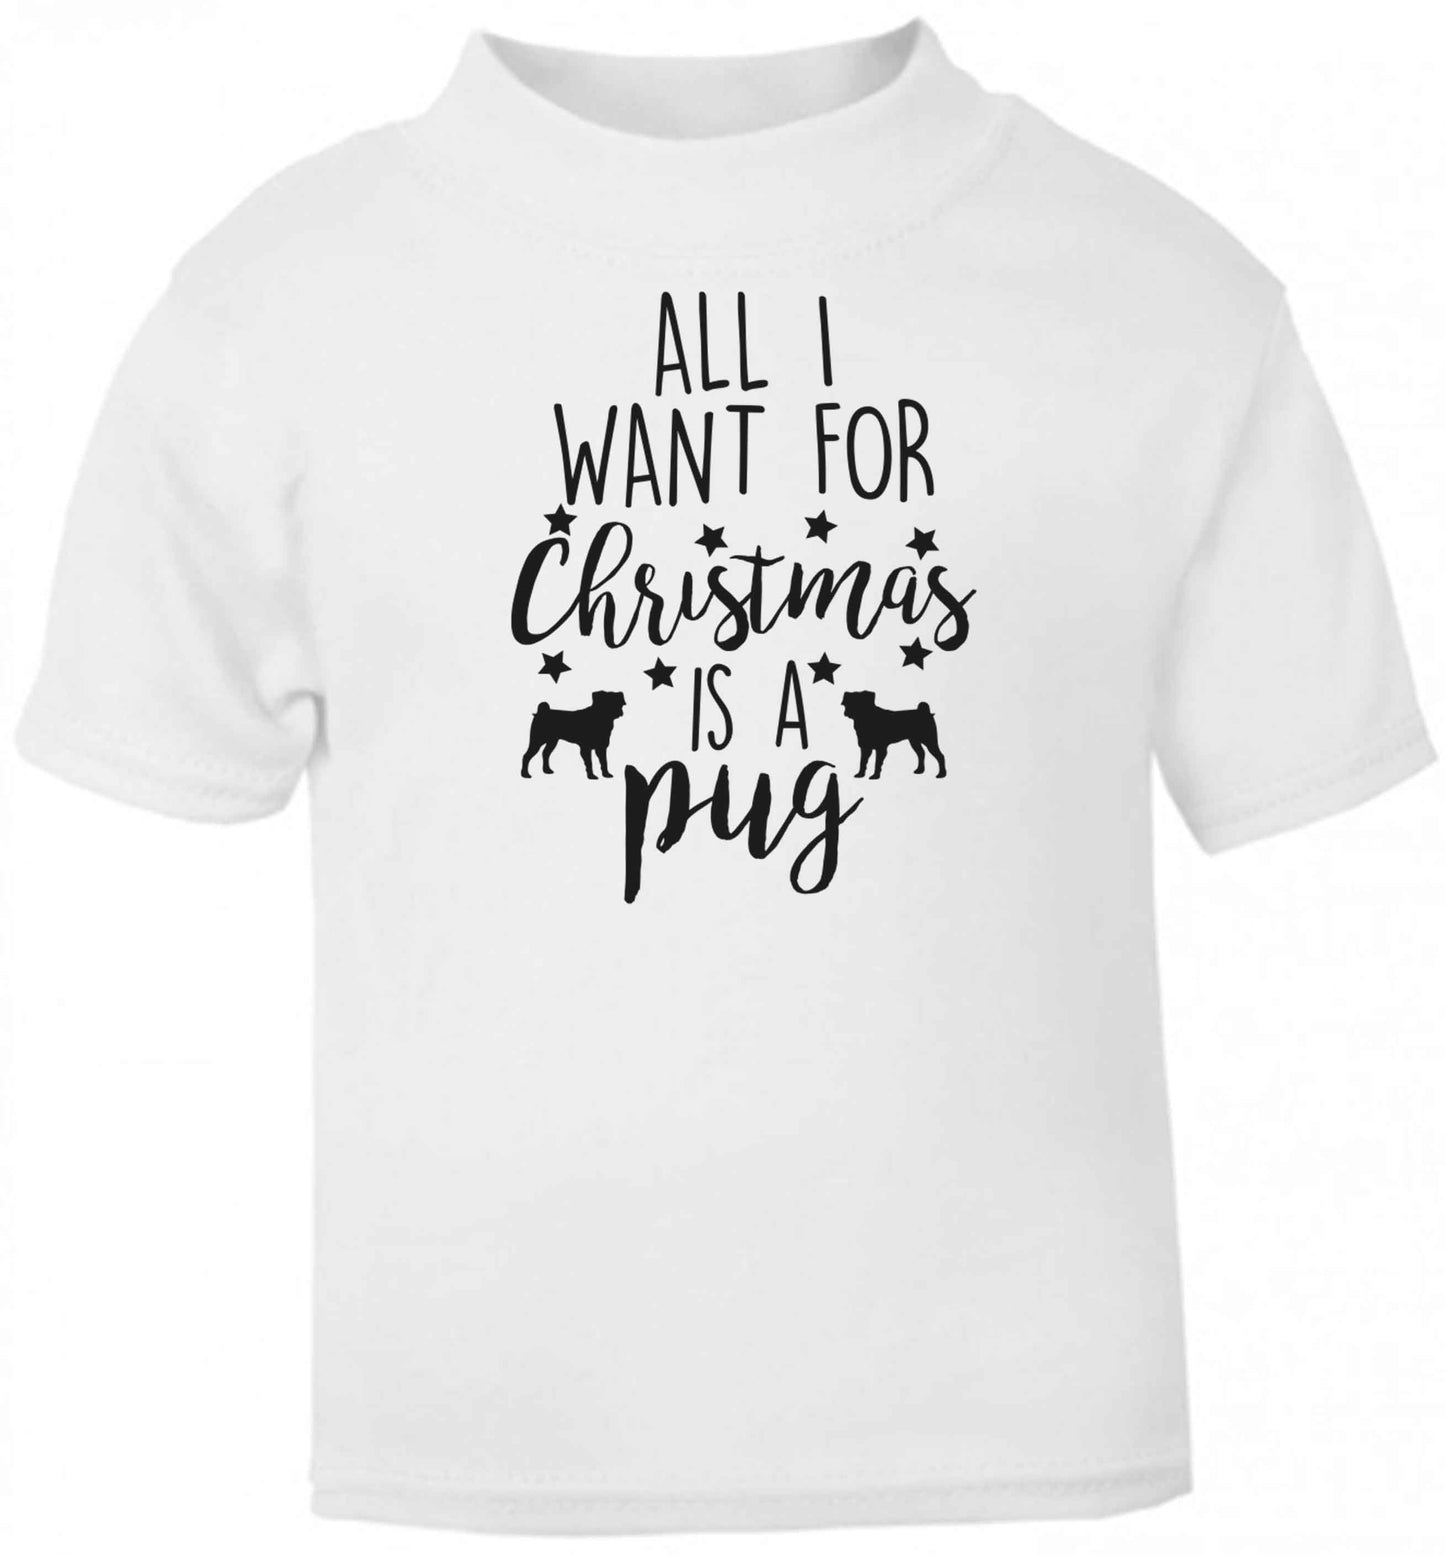 All I want for Christmas is a pug baby toddler Tshirt 2 Years